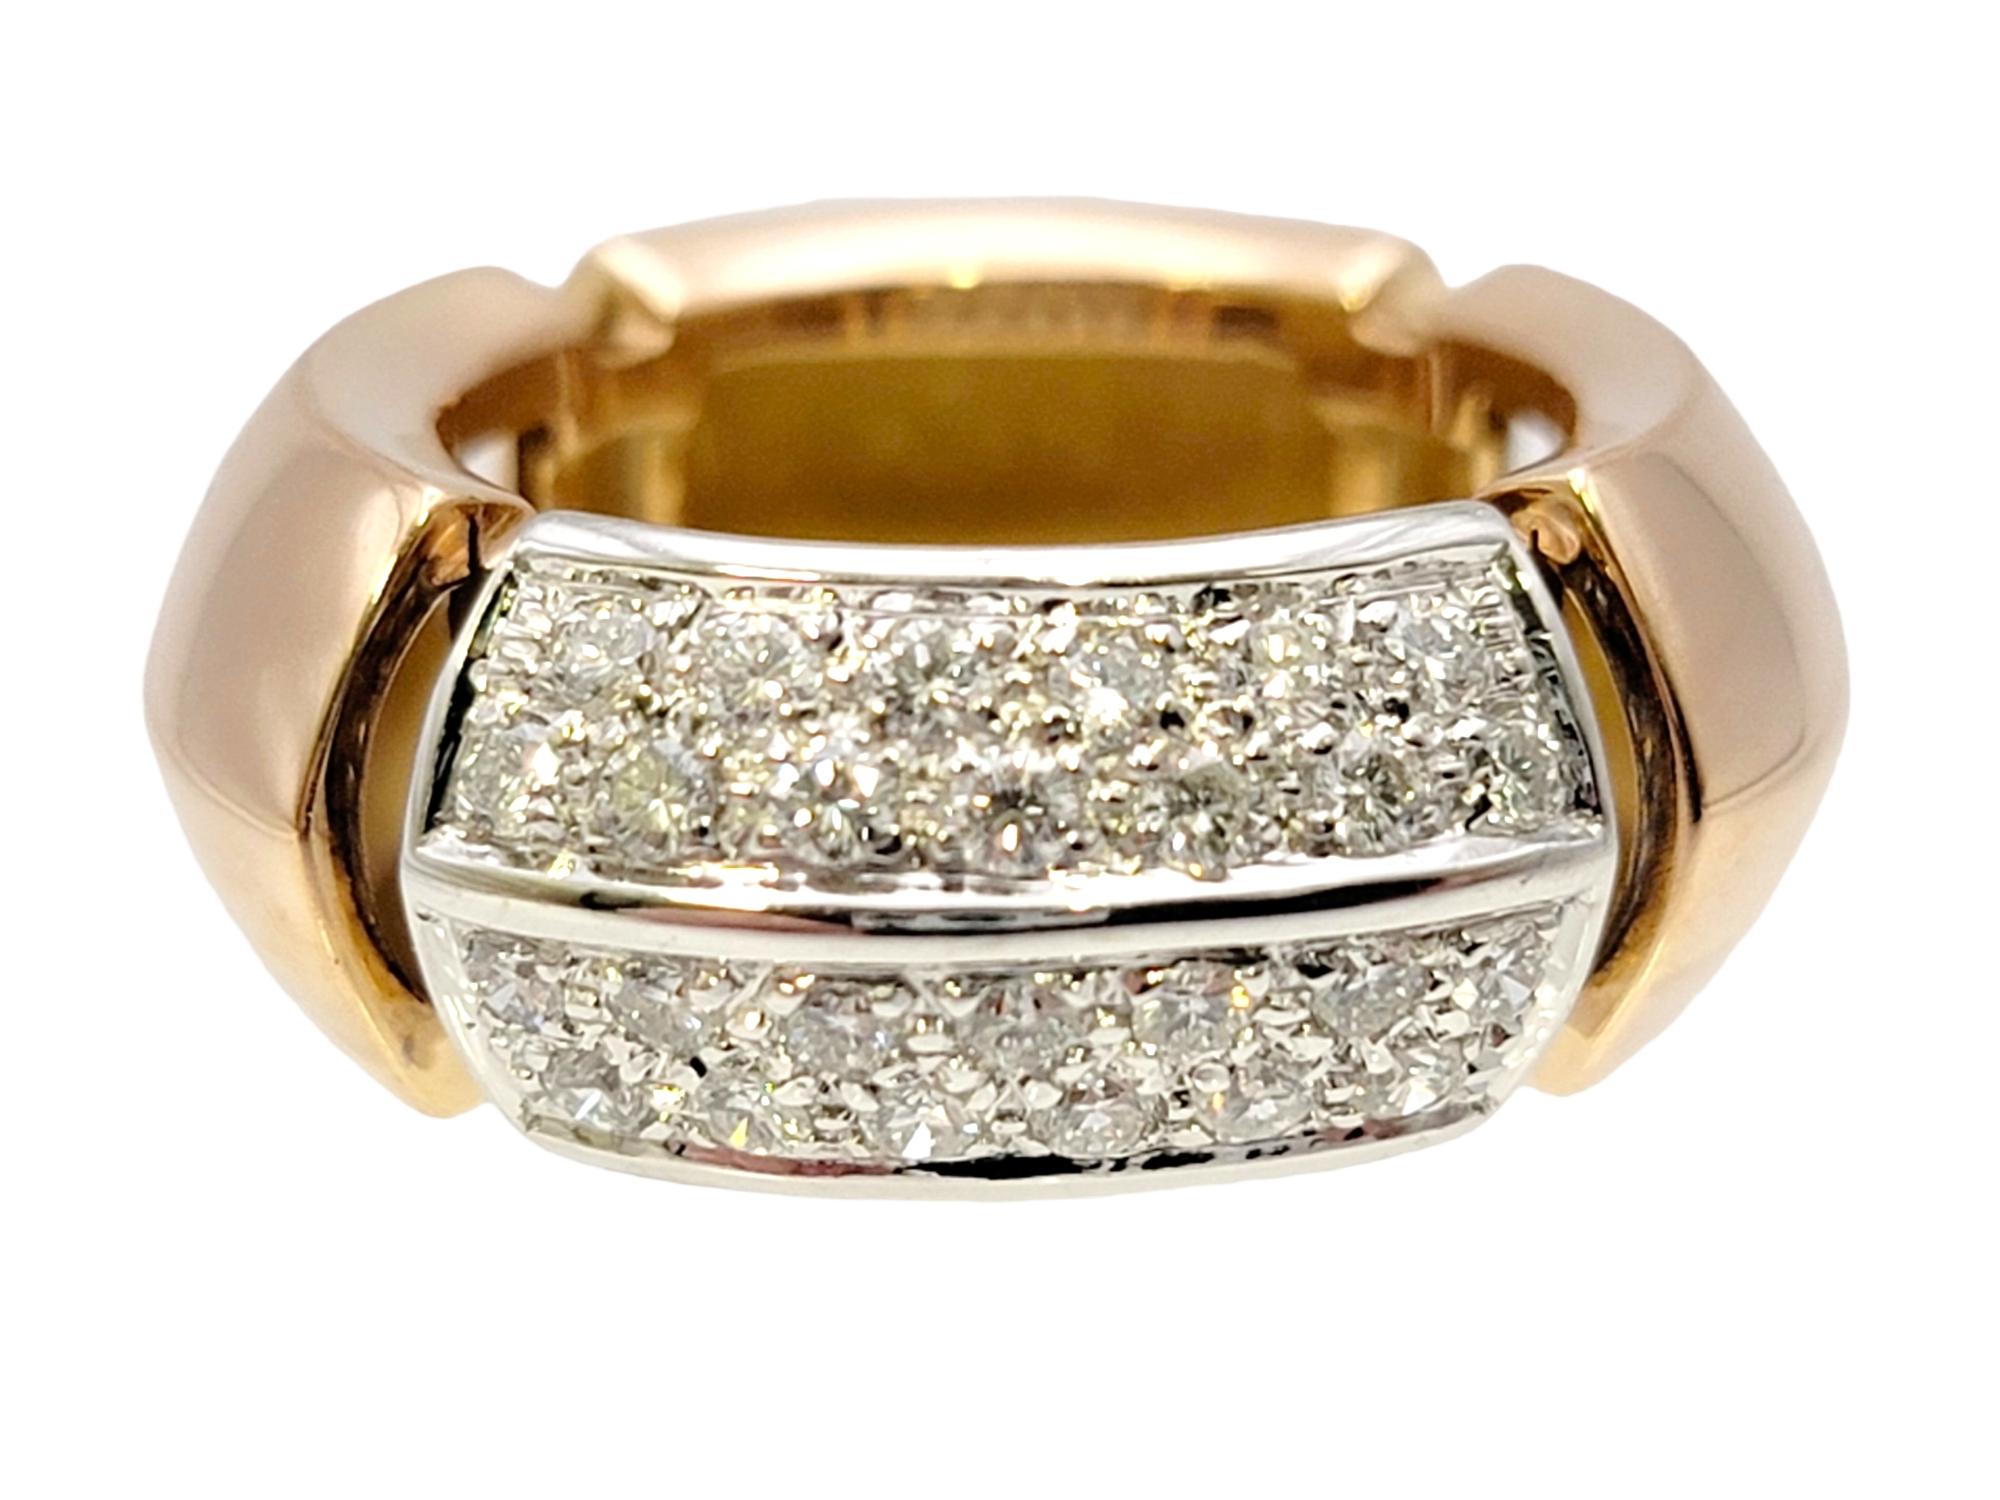 Ring size: 5.75

Sleek, contemporary diamond band ring by Italian designer, Antonini Milano. Since their foundation in 1919, Antonini has been creating timeless jewelry using top-quality craftsmanship and sophisticated designs. They are also winners